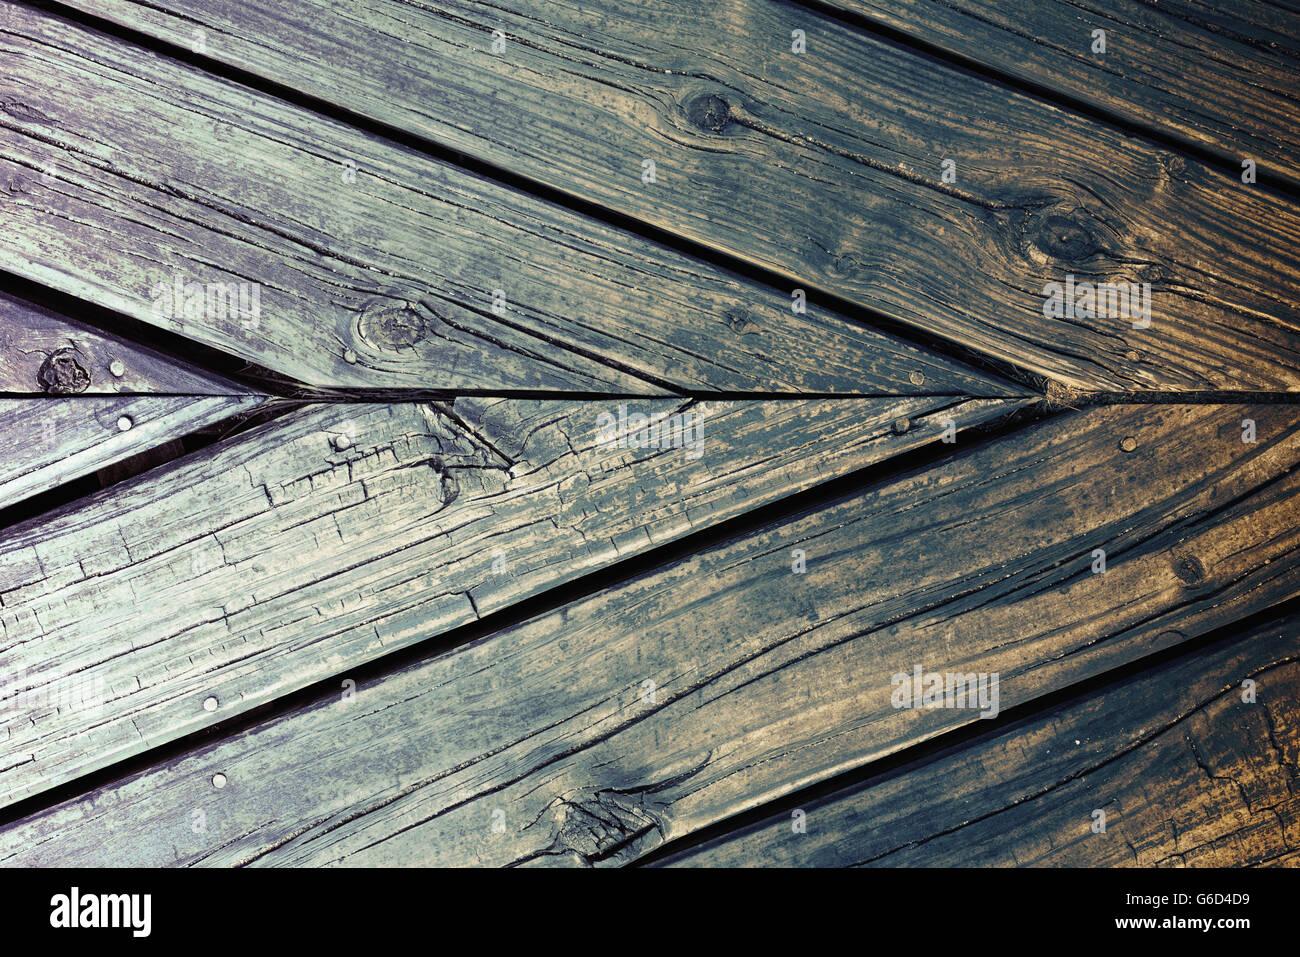 Close up top view of natural wood panel floor surface, hipster vintage style rustic background texture. Stock Photo